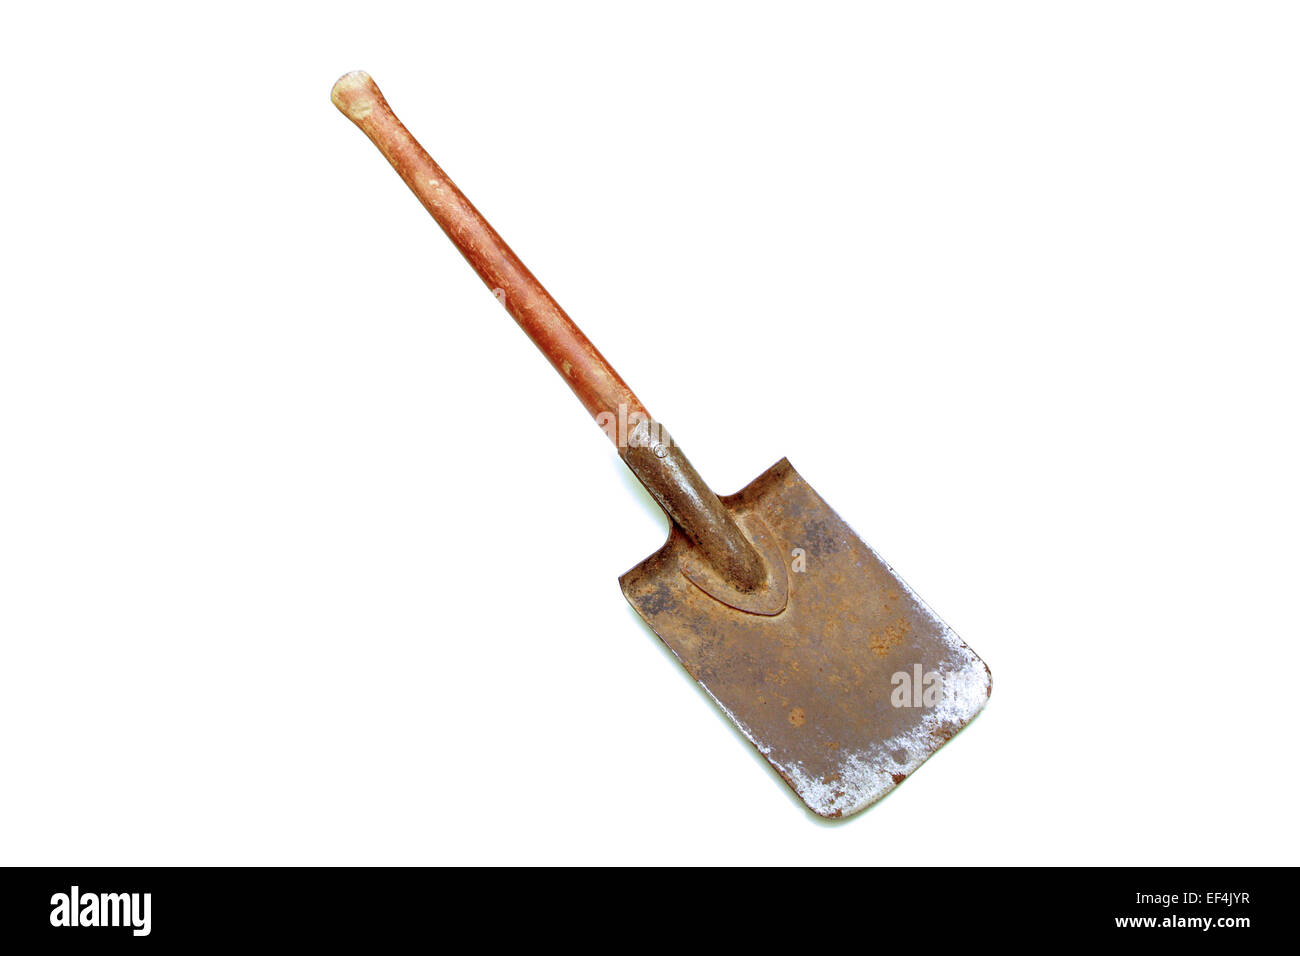 vintage spade with red handle on white background Stock Photo